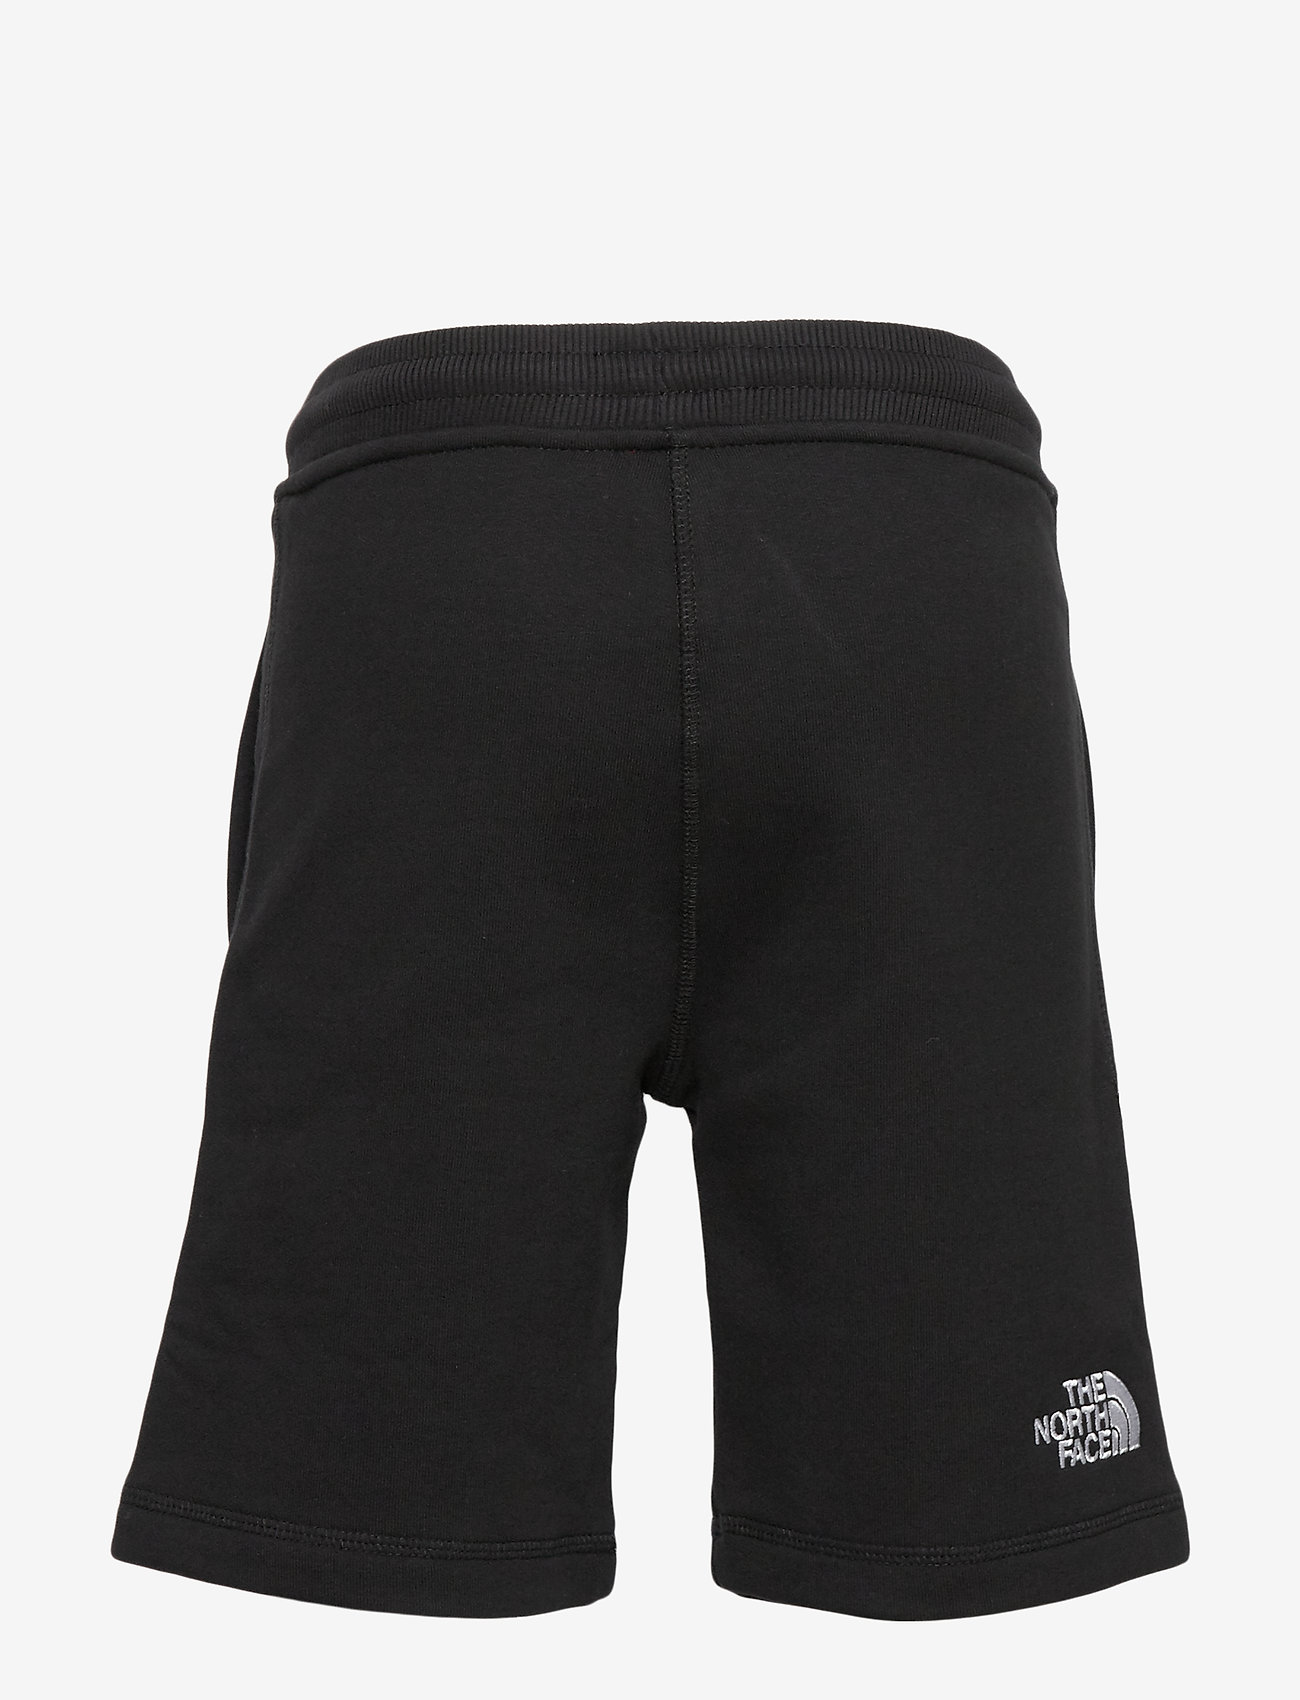 white north face shorts